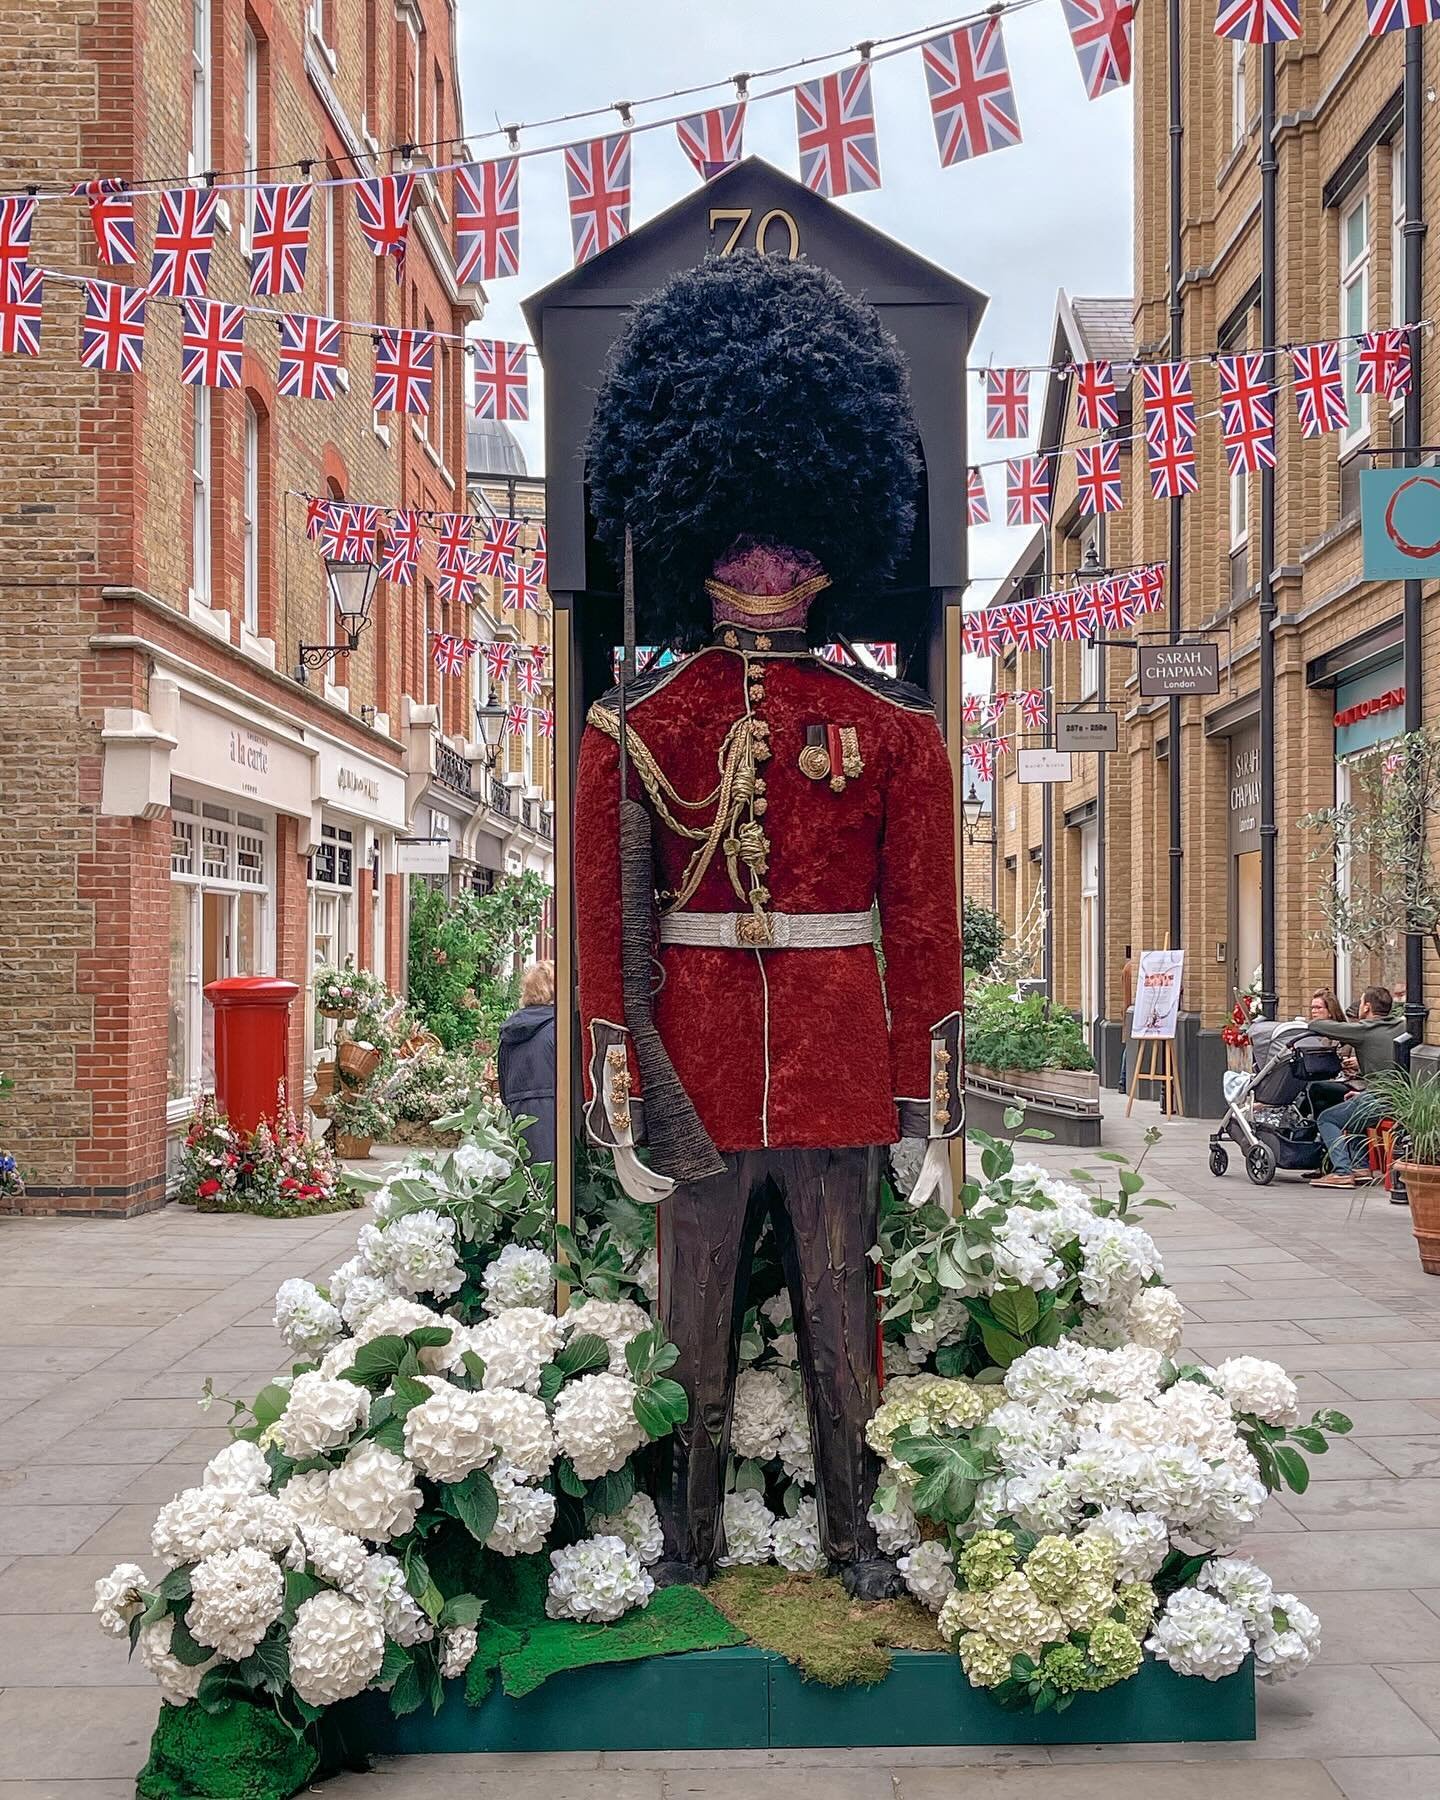 Chelsea in Bloom runs concurrently with the Chelsea Flower Show is 21 May to 24 May. This year&rsquo;s theme is Floral Feasts. I&rsquo;m planning to take a day and see all the wonderful displays!

Wish you were here,
Xoxo

#chelseainbloom #chelseaflo